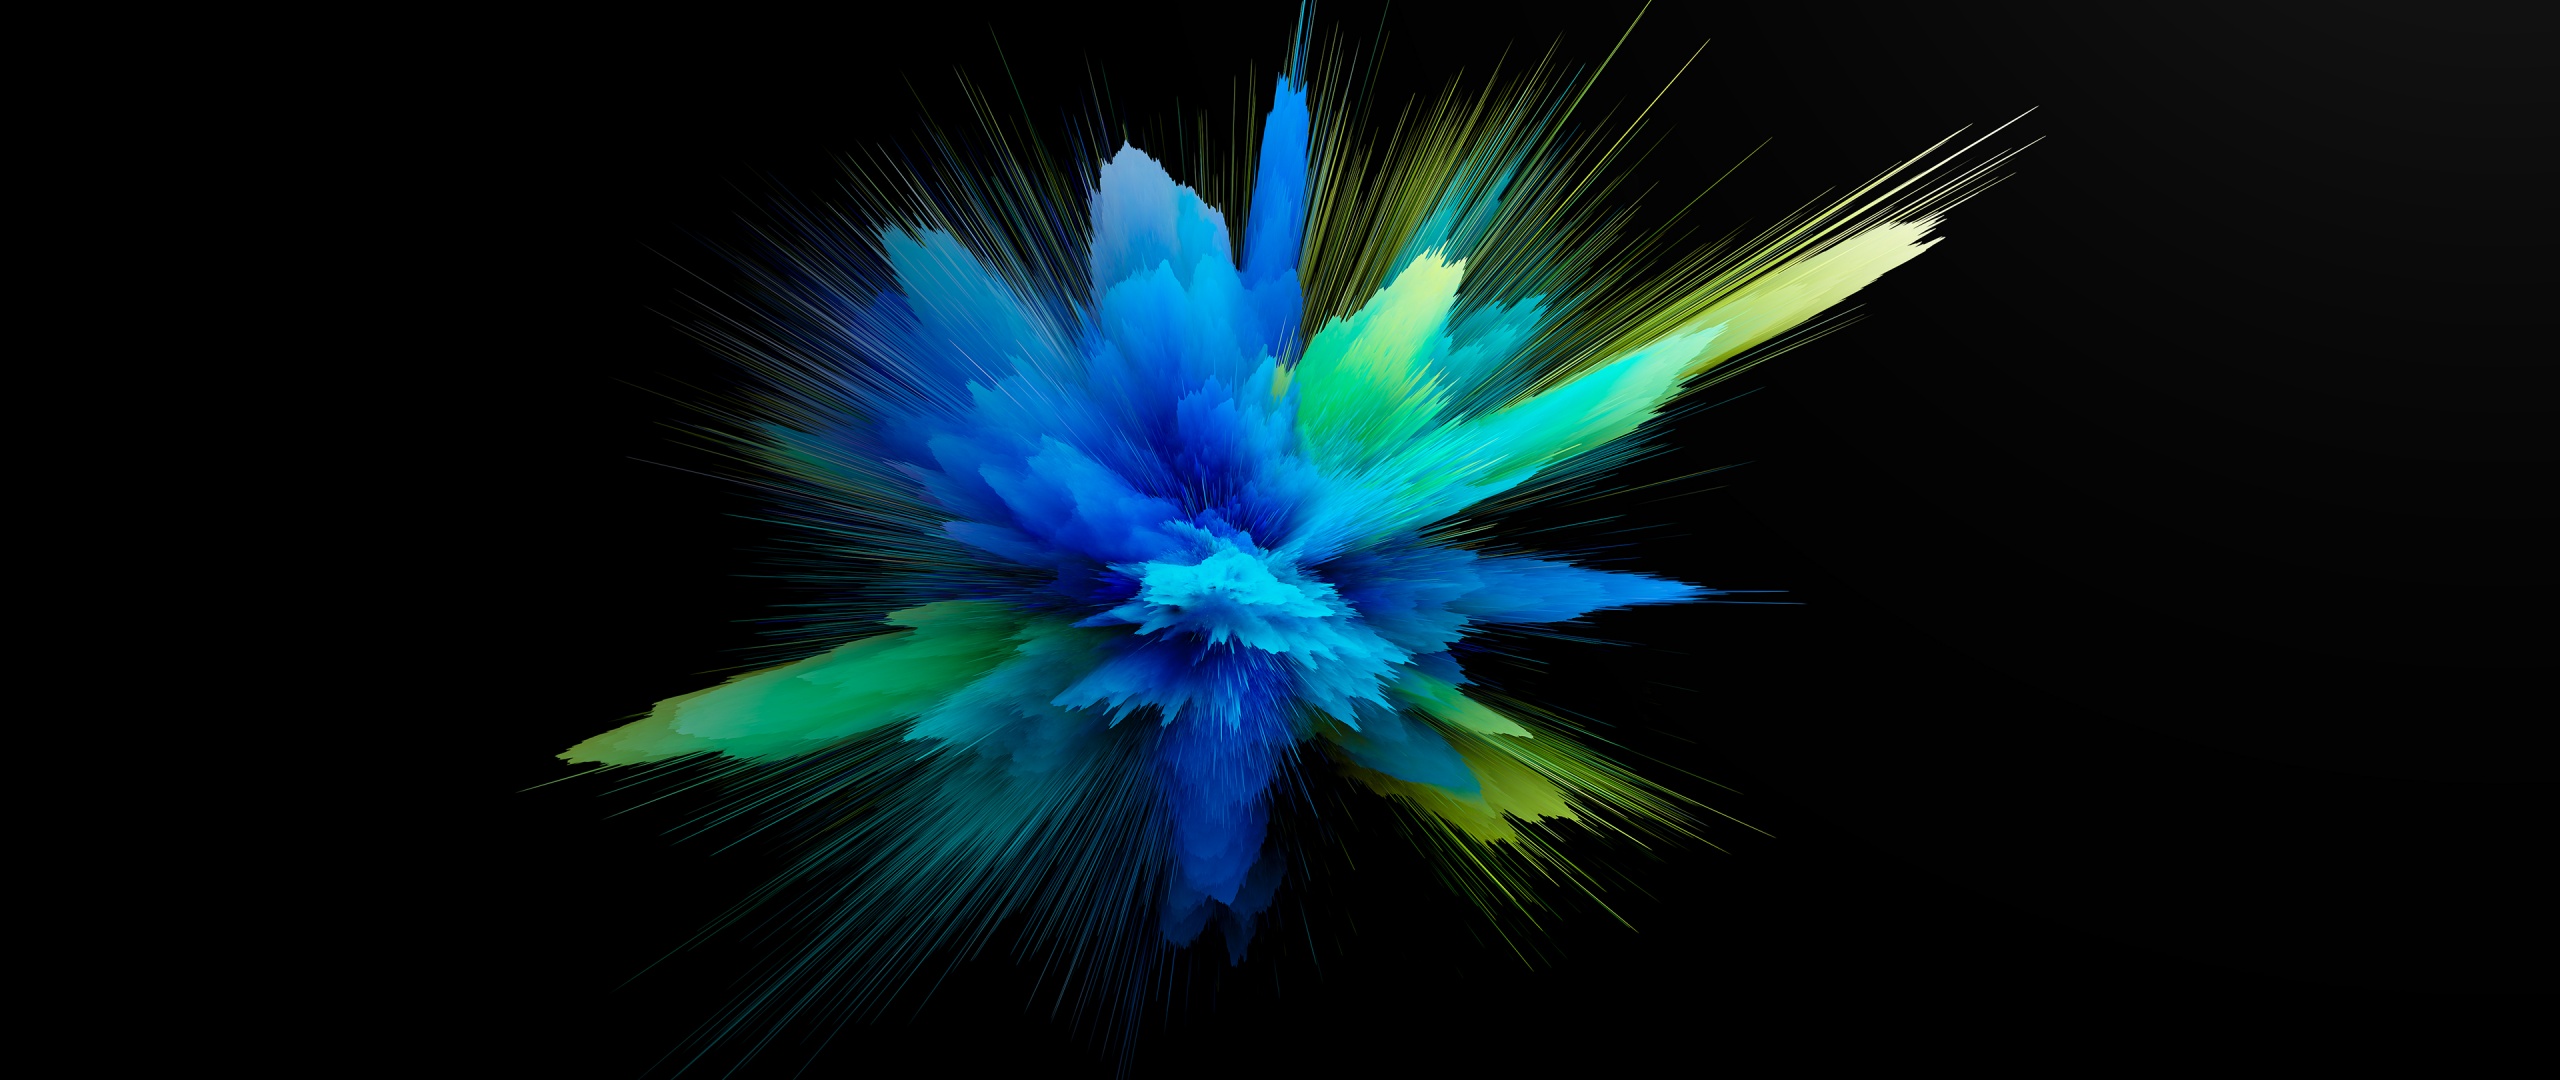 Color burst Wallpaper 4K, Colorful, Explosion, Abstract, #6667